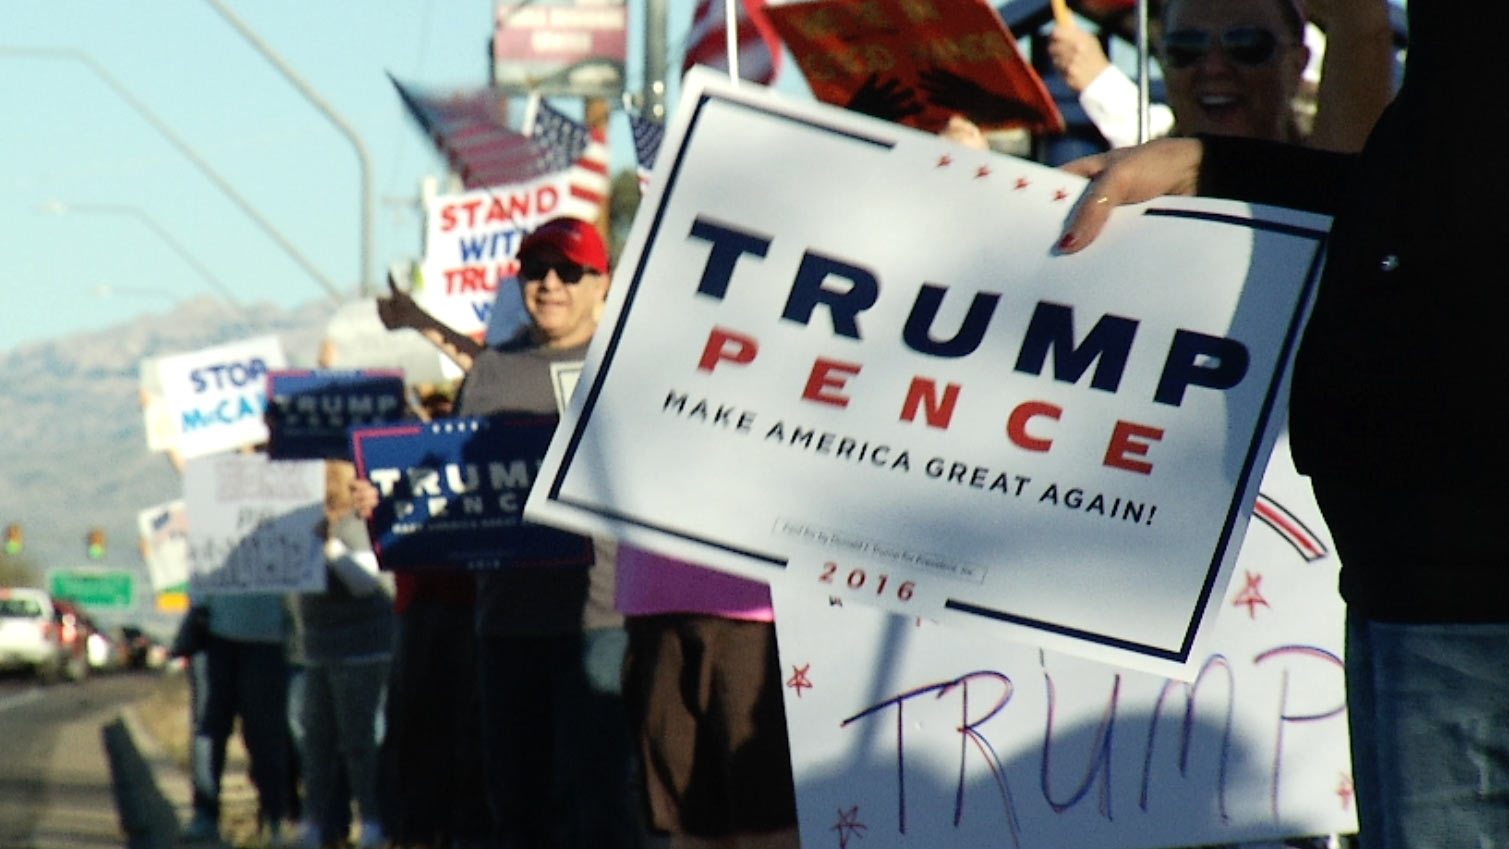 Supporters of President Trump rally along Tucson's Tanque Verde Road, Feb. 22, 2017.